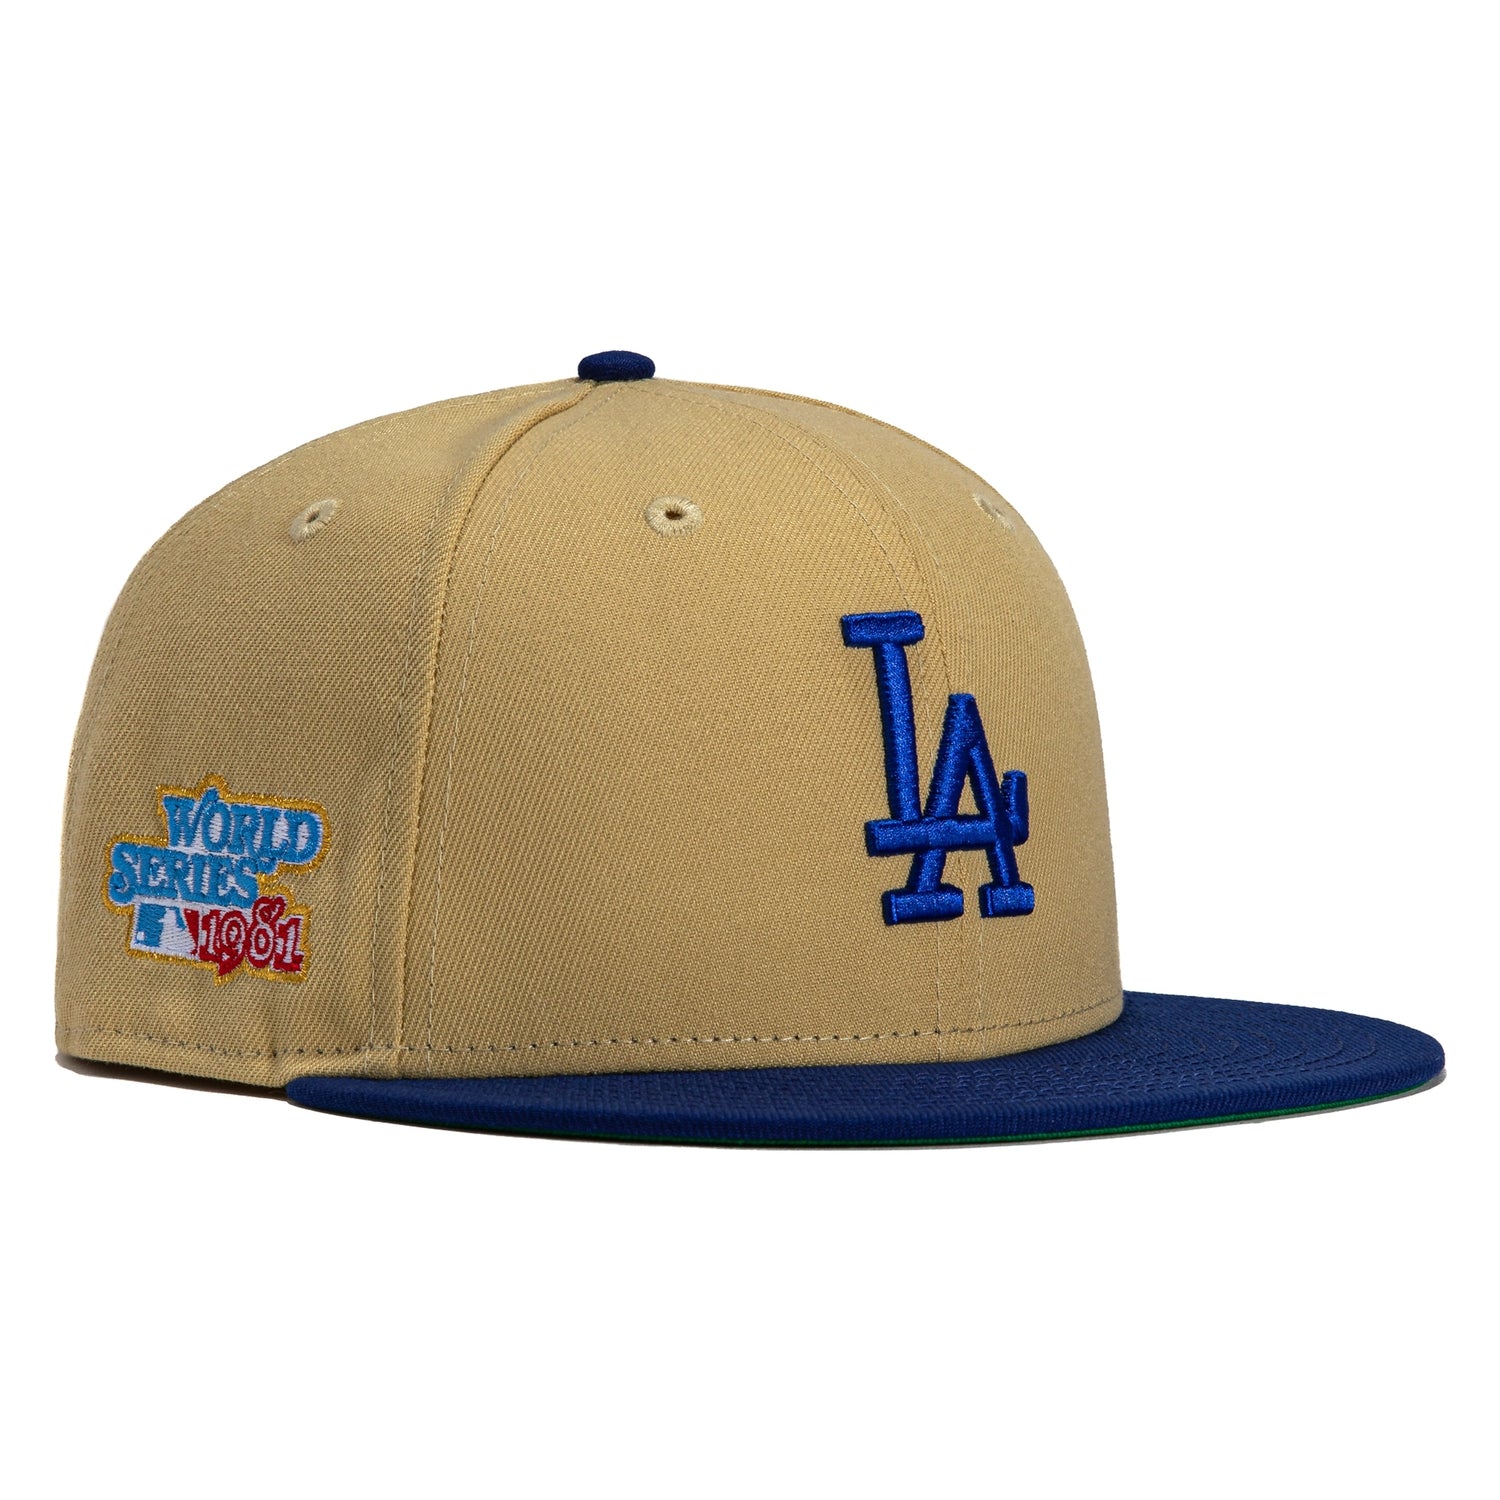 New Era 59FIFTY Toothpick Pack Los Angeles Dodgers 1981 World Series Patch Hat - Tan, Royal Tan/Royal / 7 3/4